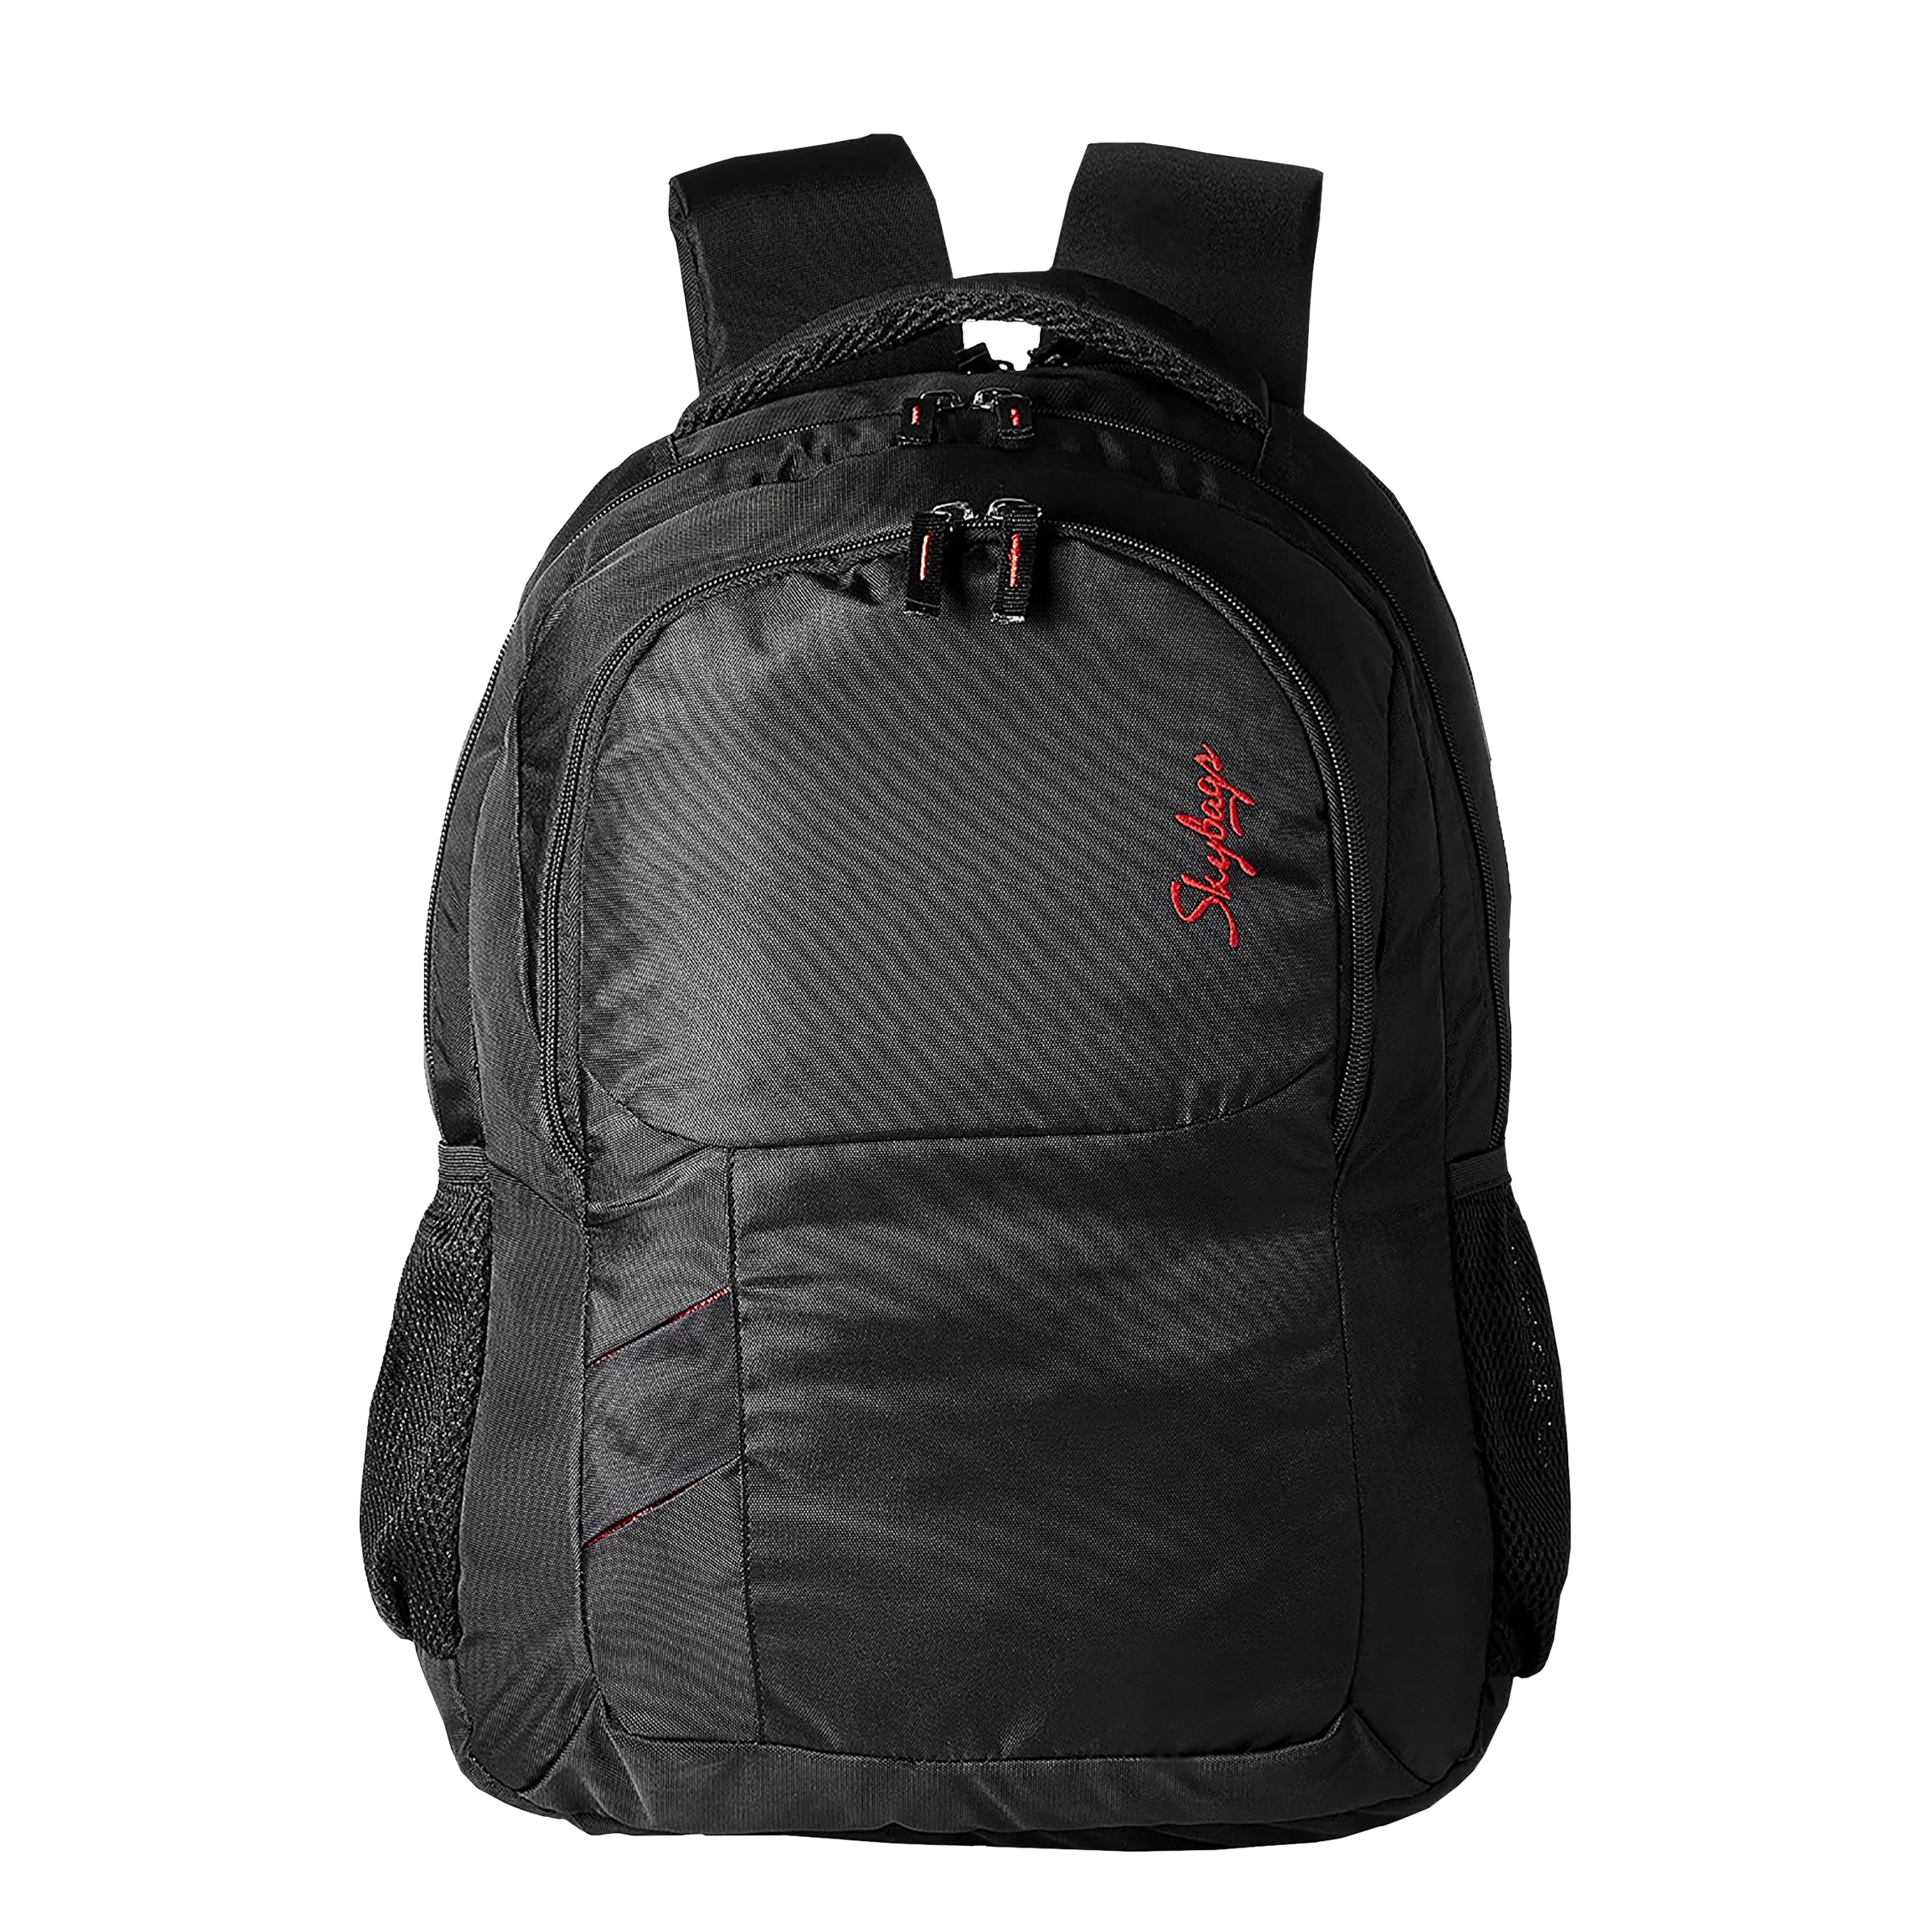 Skybags Backpack - sky bag backpack Price Starting From Rs 1,500/Unit. Find  Verified Sellers in Varanasi - JdMart